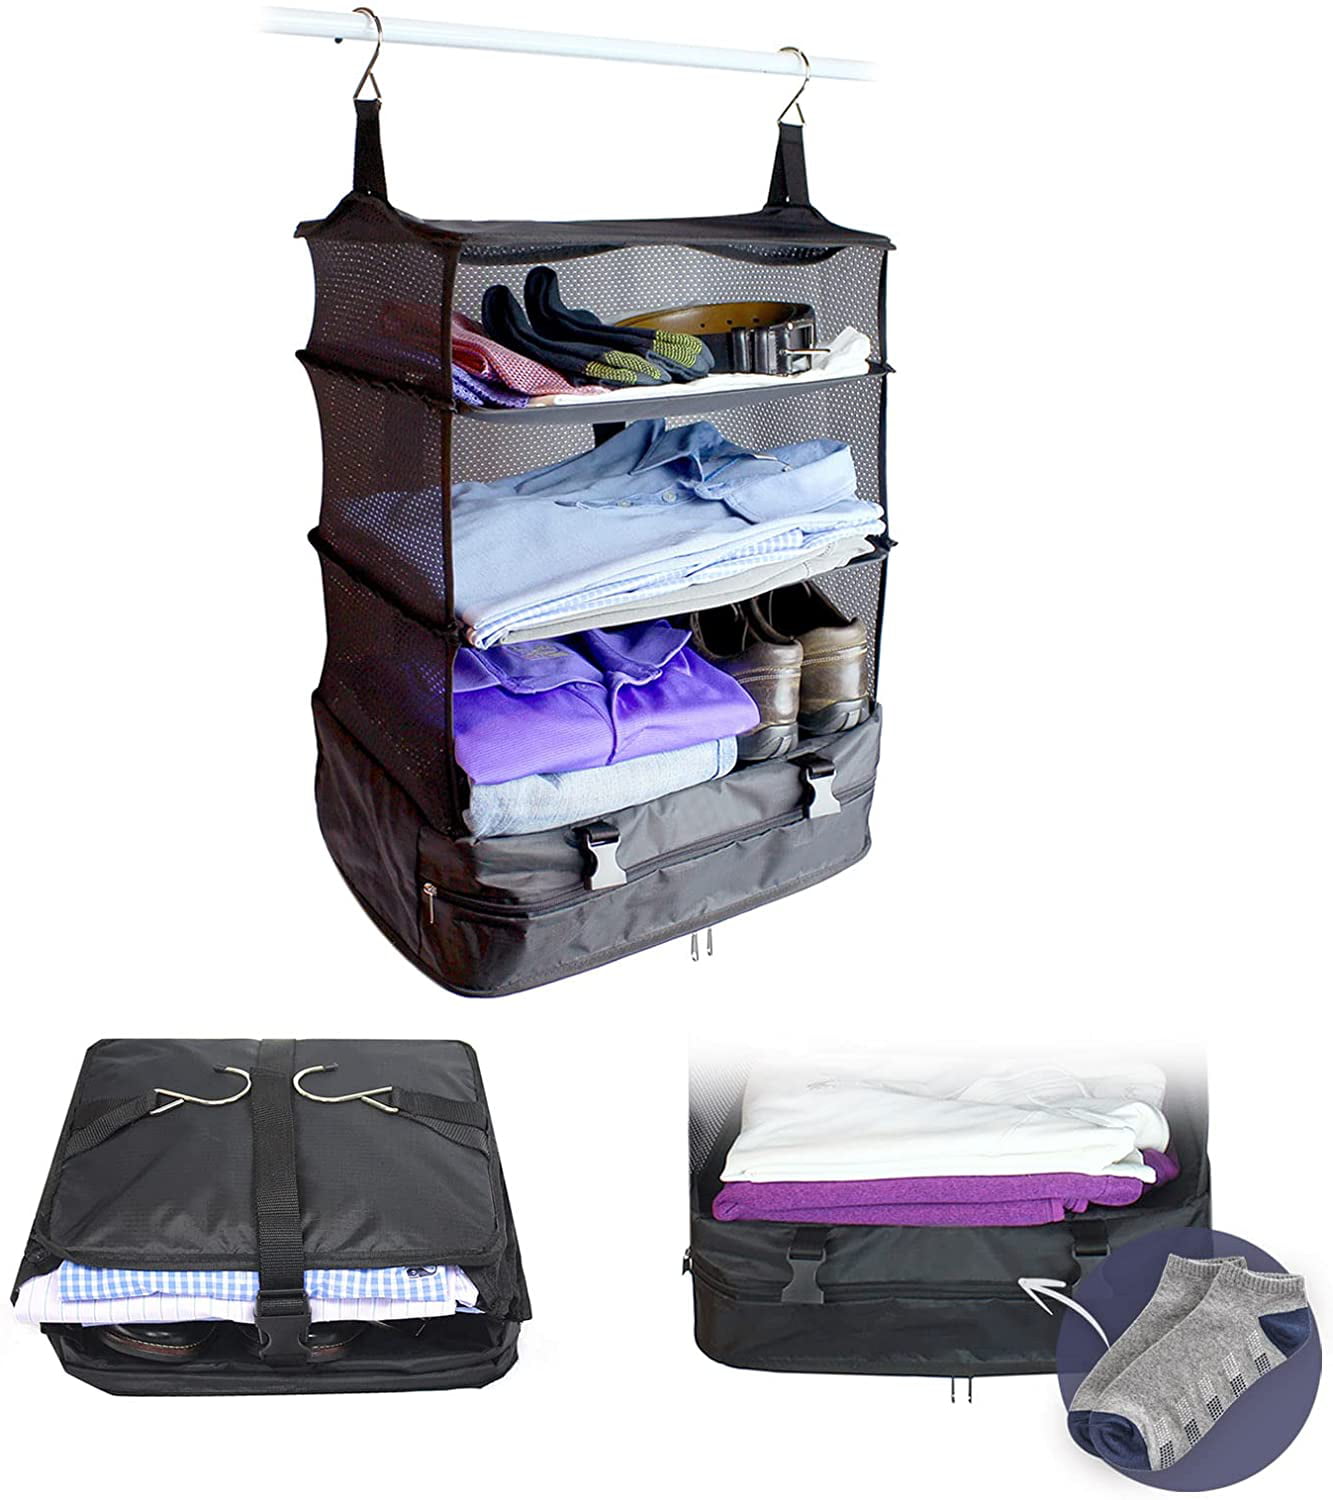 Stow-N-Go Travel Luggage Organizer and Packing Cube Space Saver With ...